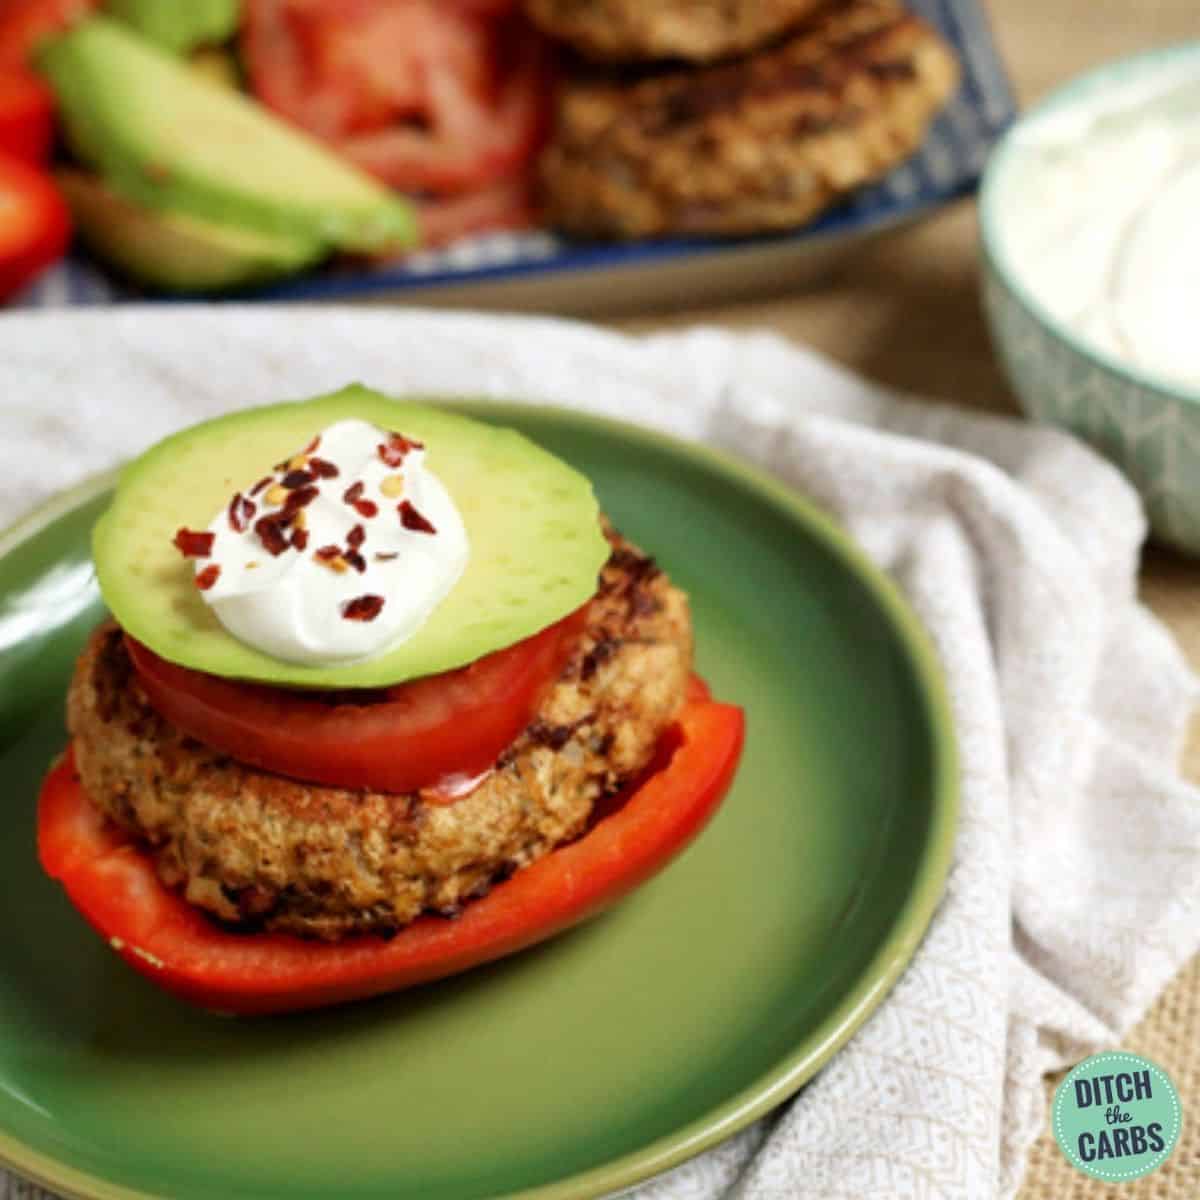 Low-carb Mexican chicken burger served with red pepper tomato avocado and cream cheese